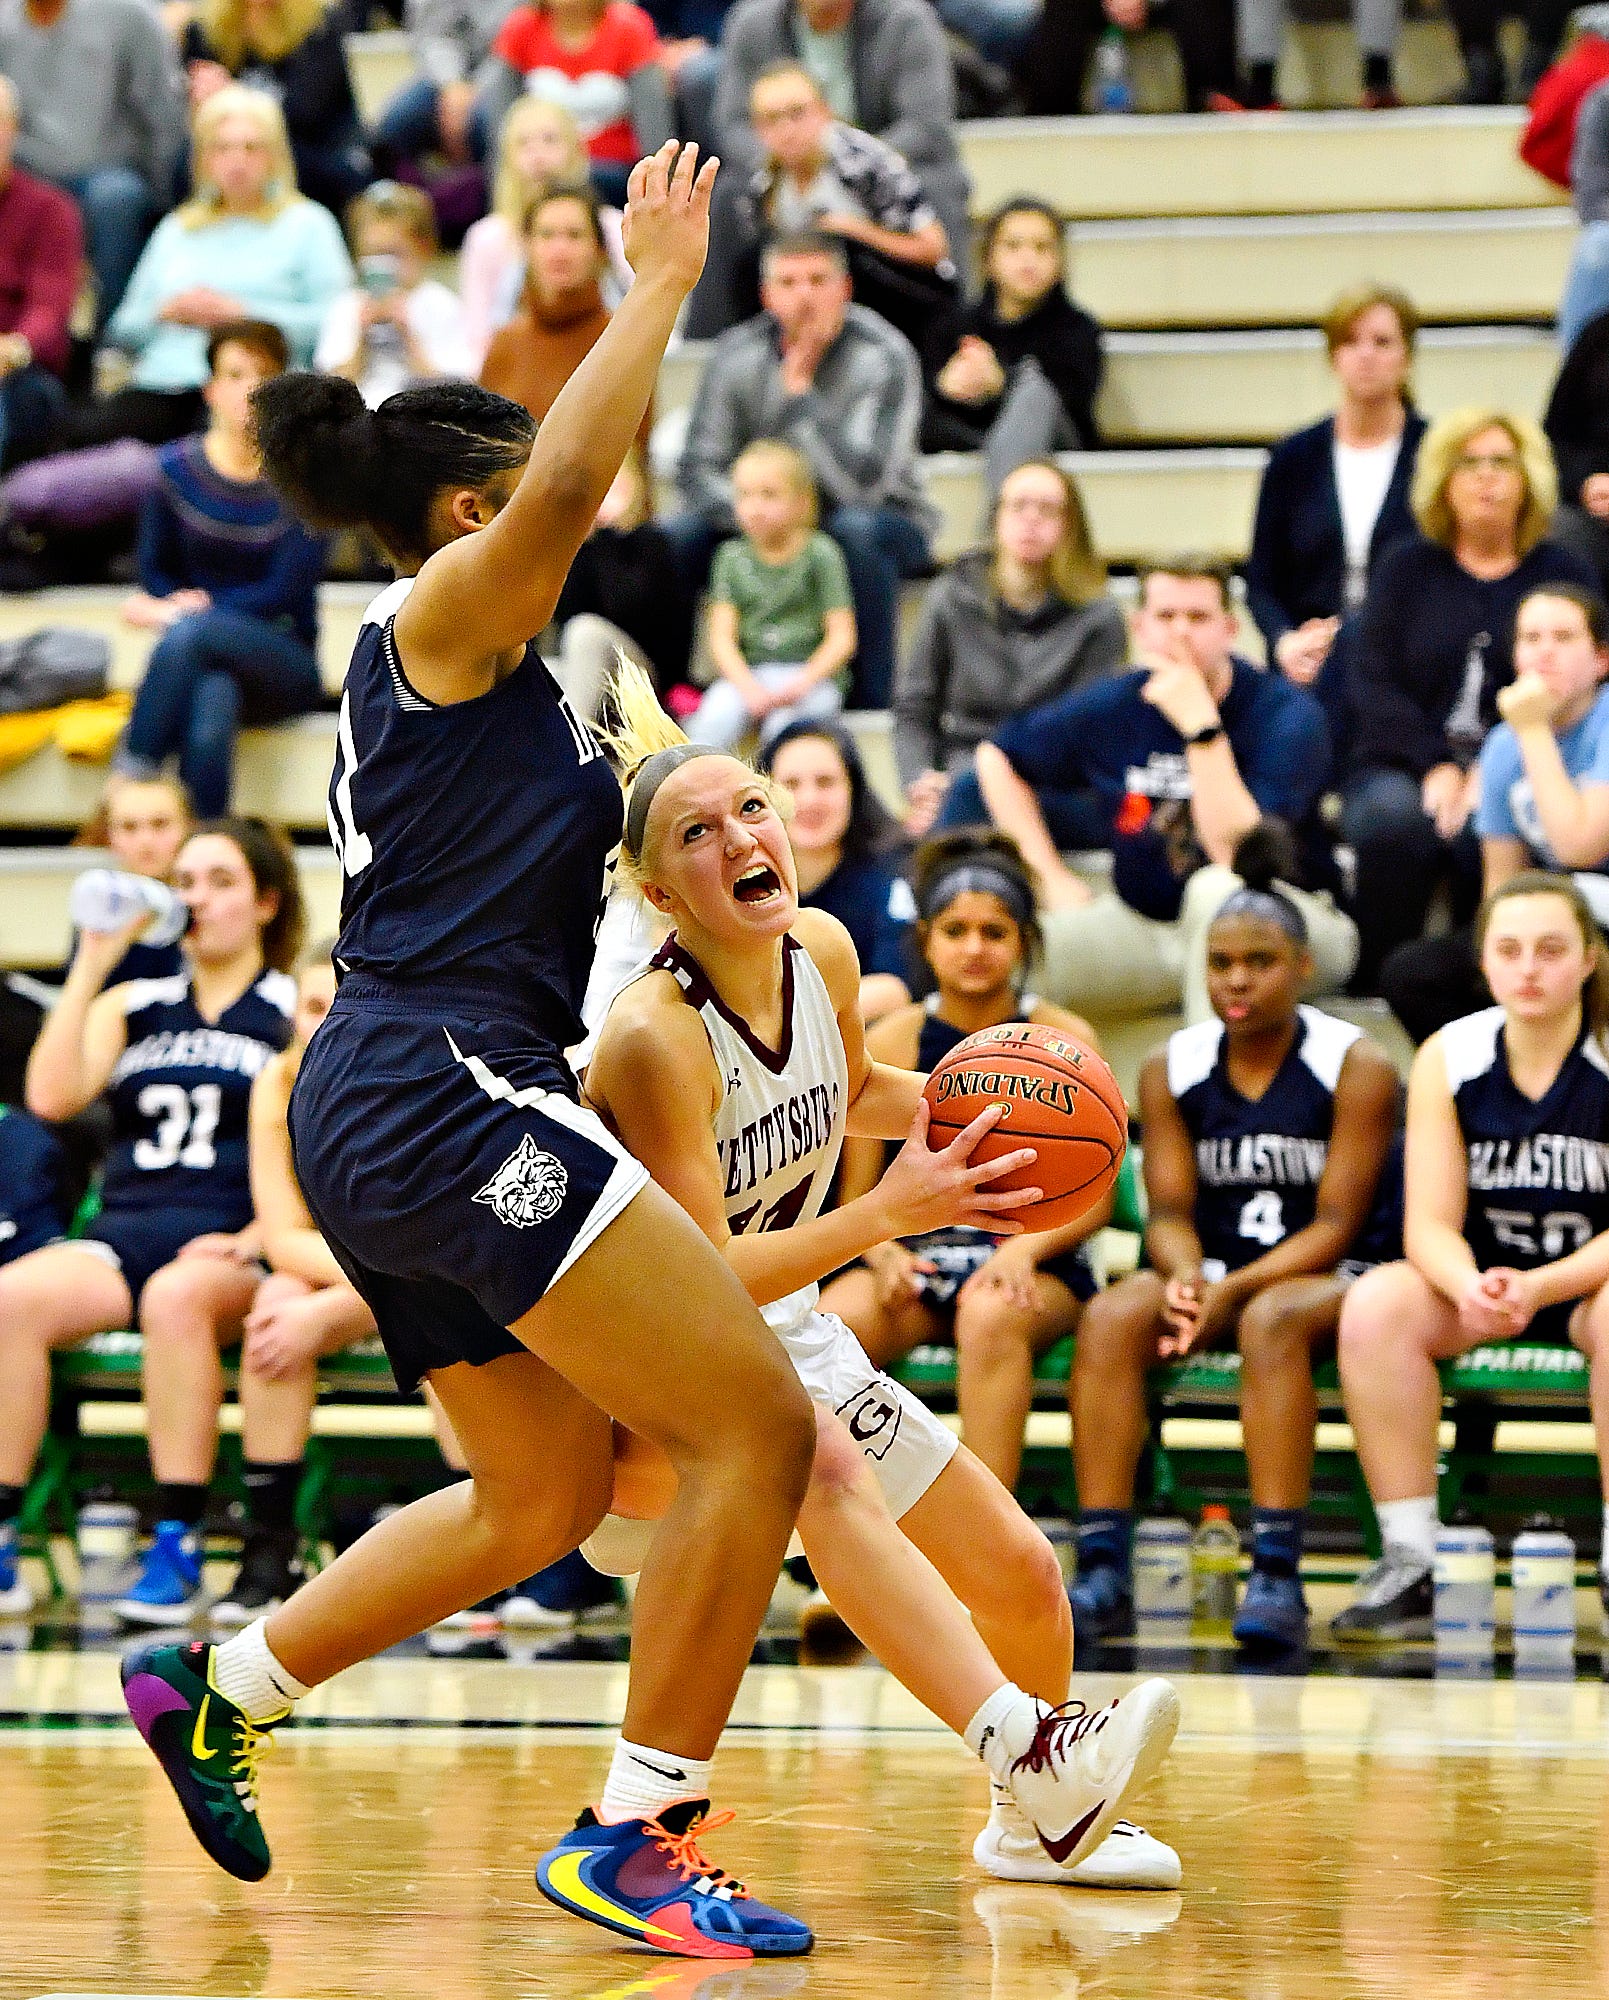 Gettysburg's Anne Bair, right, works to get around Dallastown's Bria Beverly during YAIAA girls' basketball championship action at Grumbacher Sport and Fitness Center at York College of Pennsylvania in Spring Garden Township, Friday, Feb. 14, 2020. Dallastown would win the game 42-38. Dawn J. Sagert photo